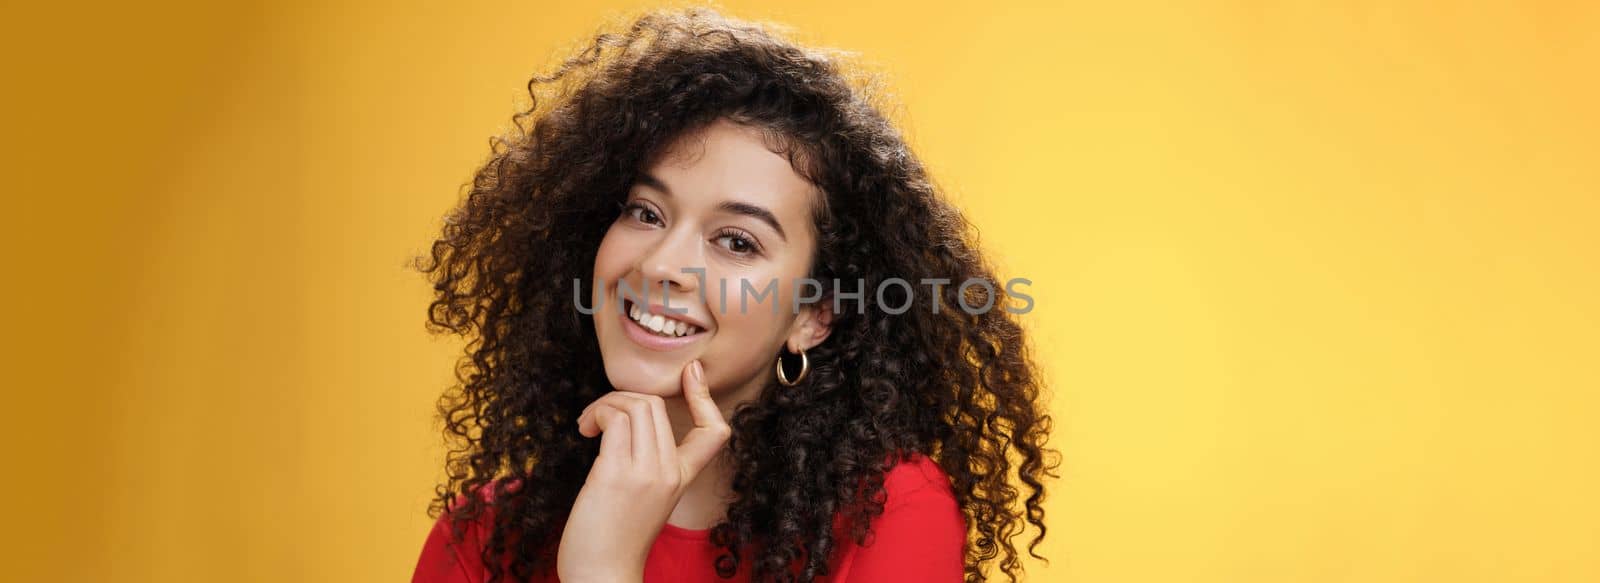 Headshot of cute silly and tender feminine romantic woman with curly hairstyle touching lip with index finger making eyes at camera and smiling as using seduction skills over yellow background by Benzoix